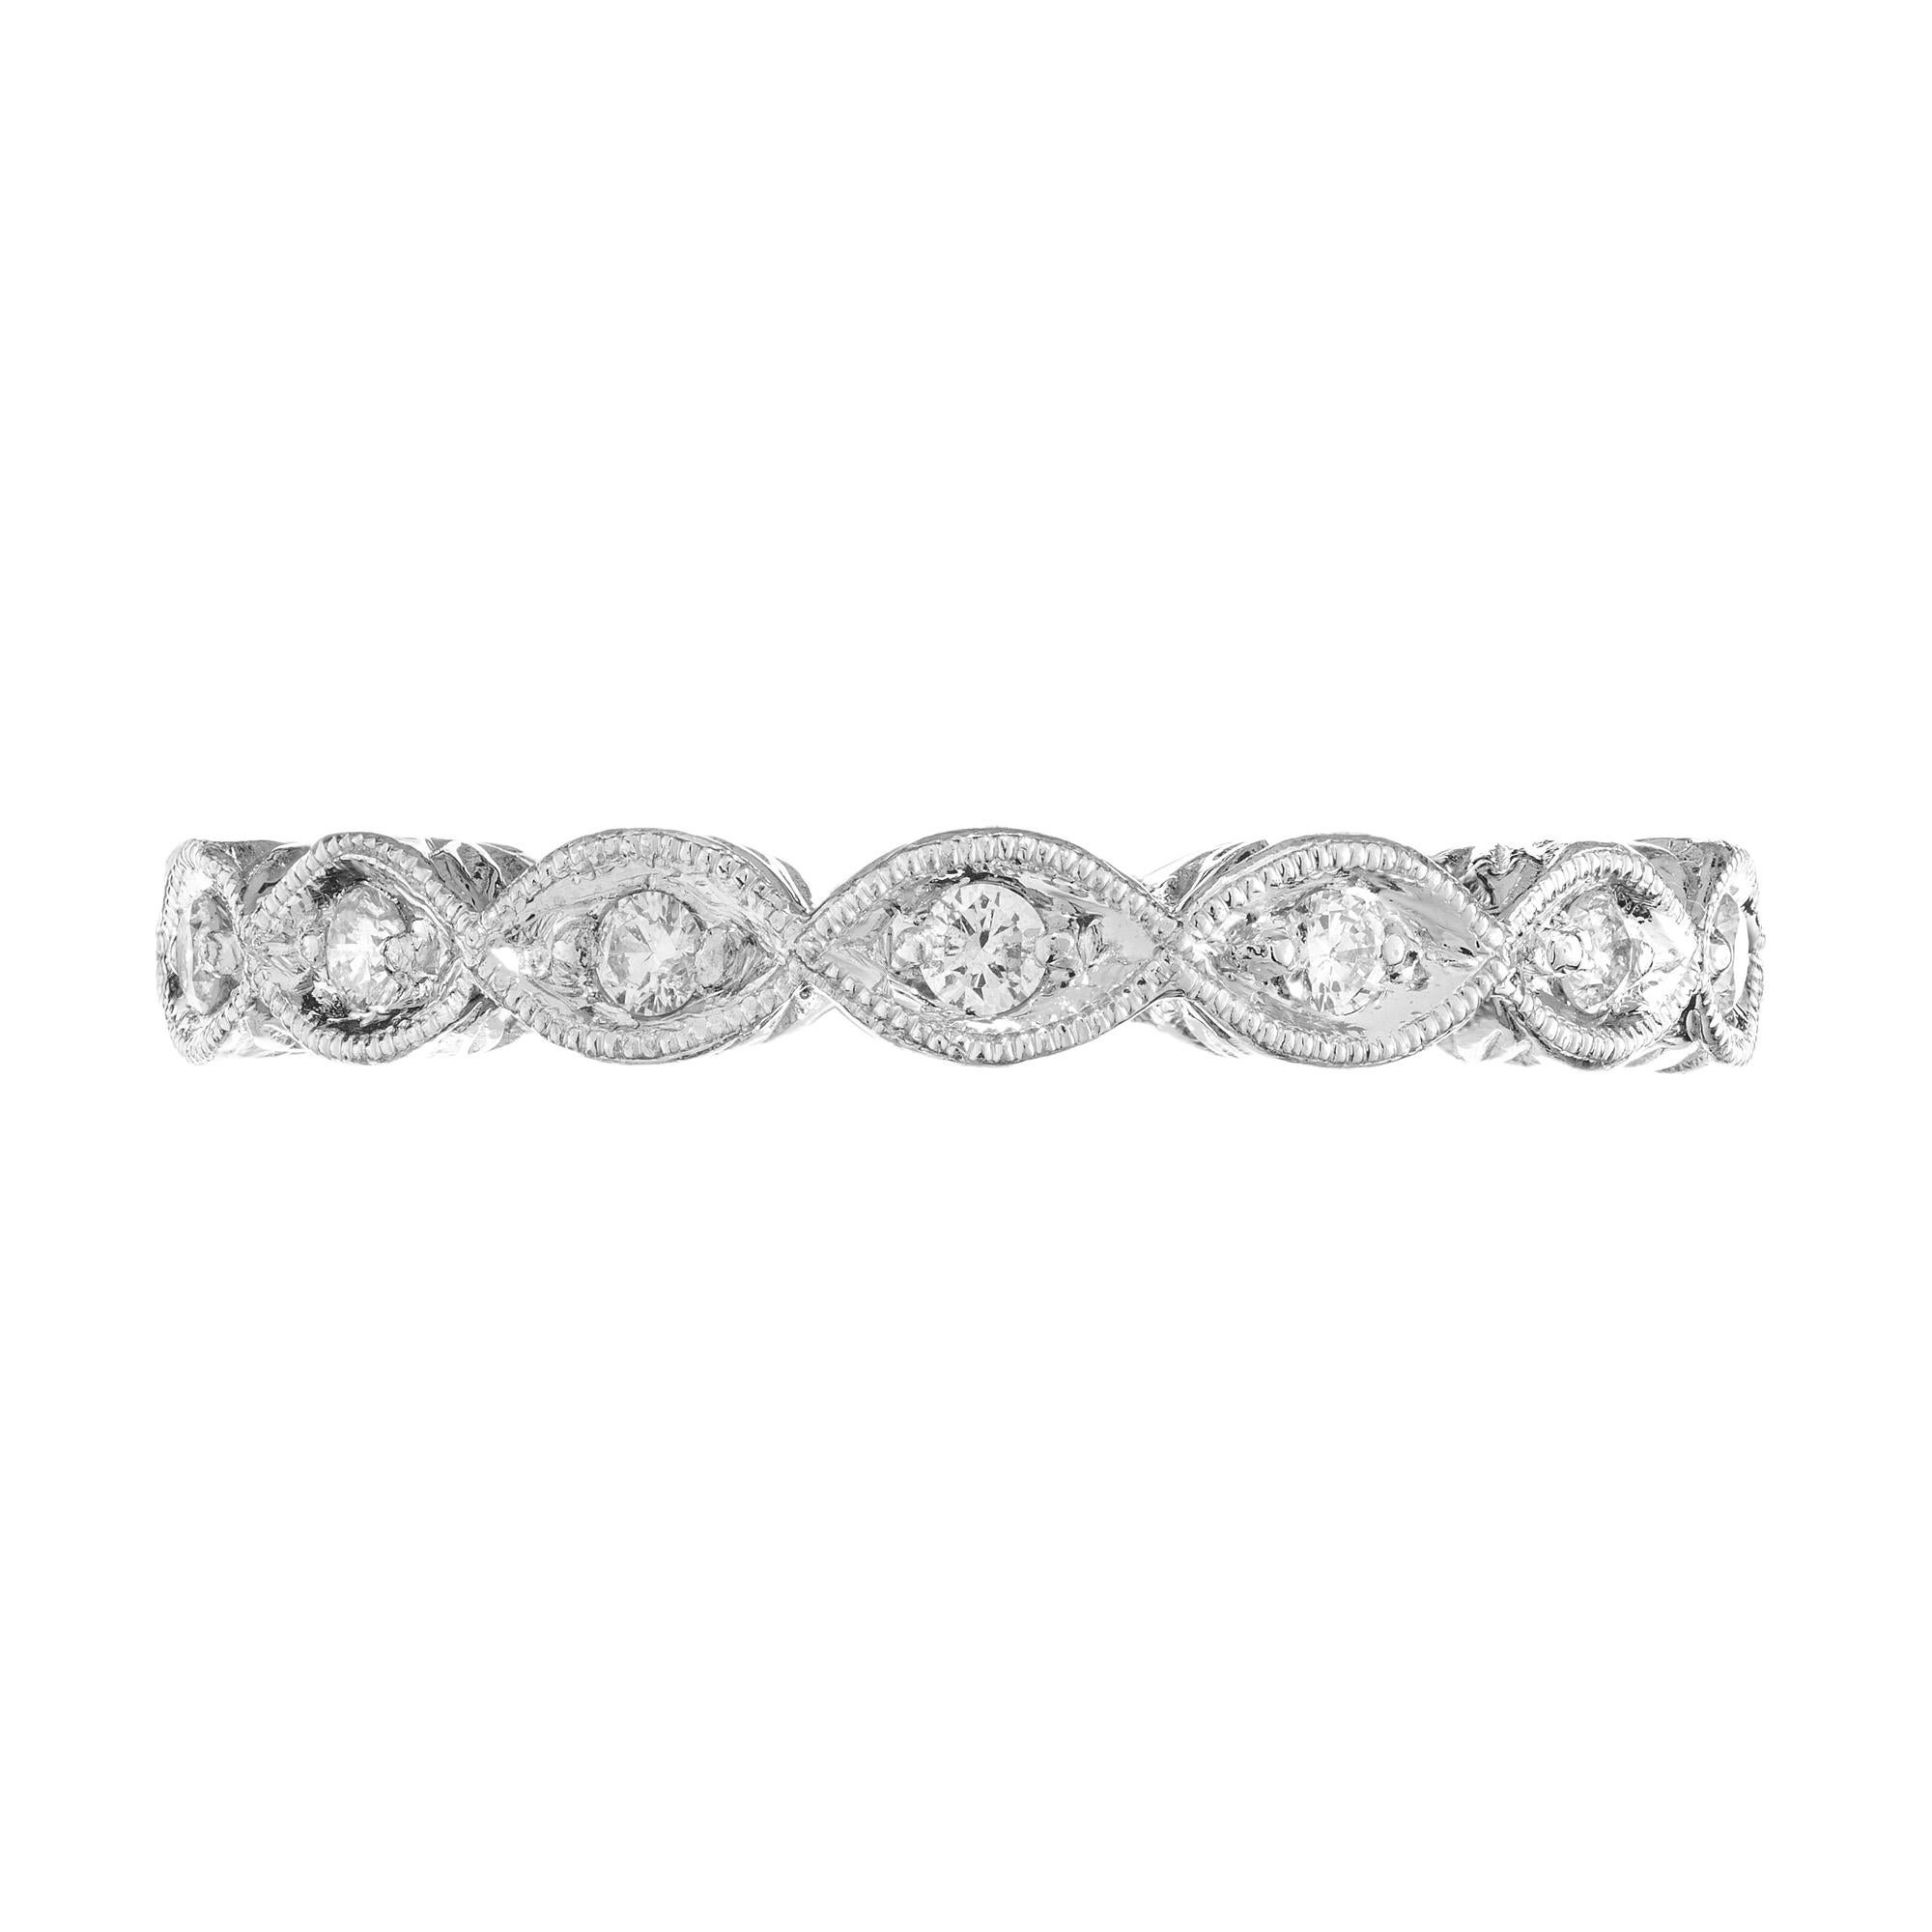 Crafted to perfection, this timeless diamond wedding band showcases a dazzling row of 14 round brilliant cut diamonds set in a lustrous platinum mounting. Beautifully hand beaded with detailed engraving. The diamonds are mounted in marquise shaped